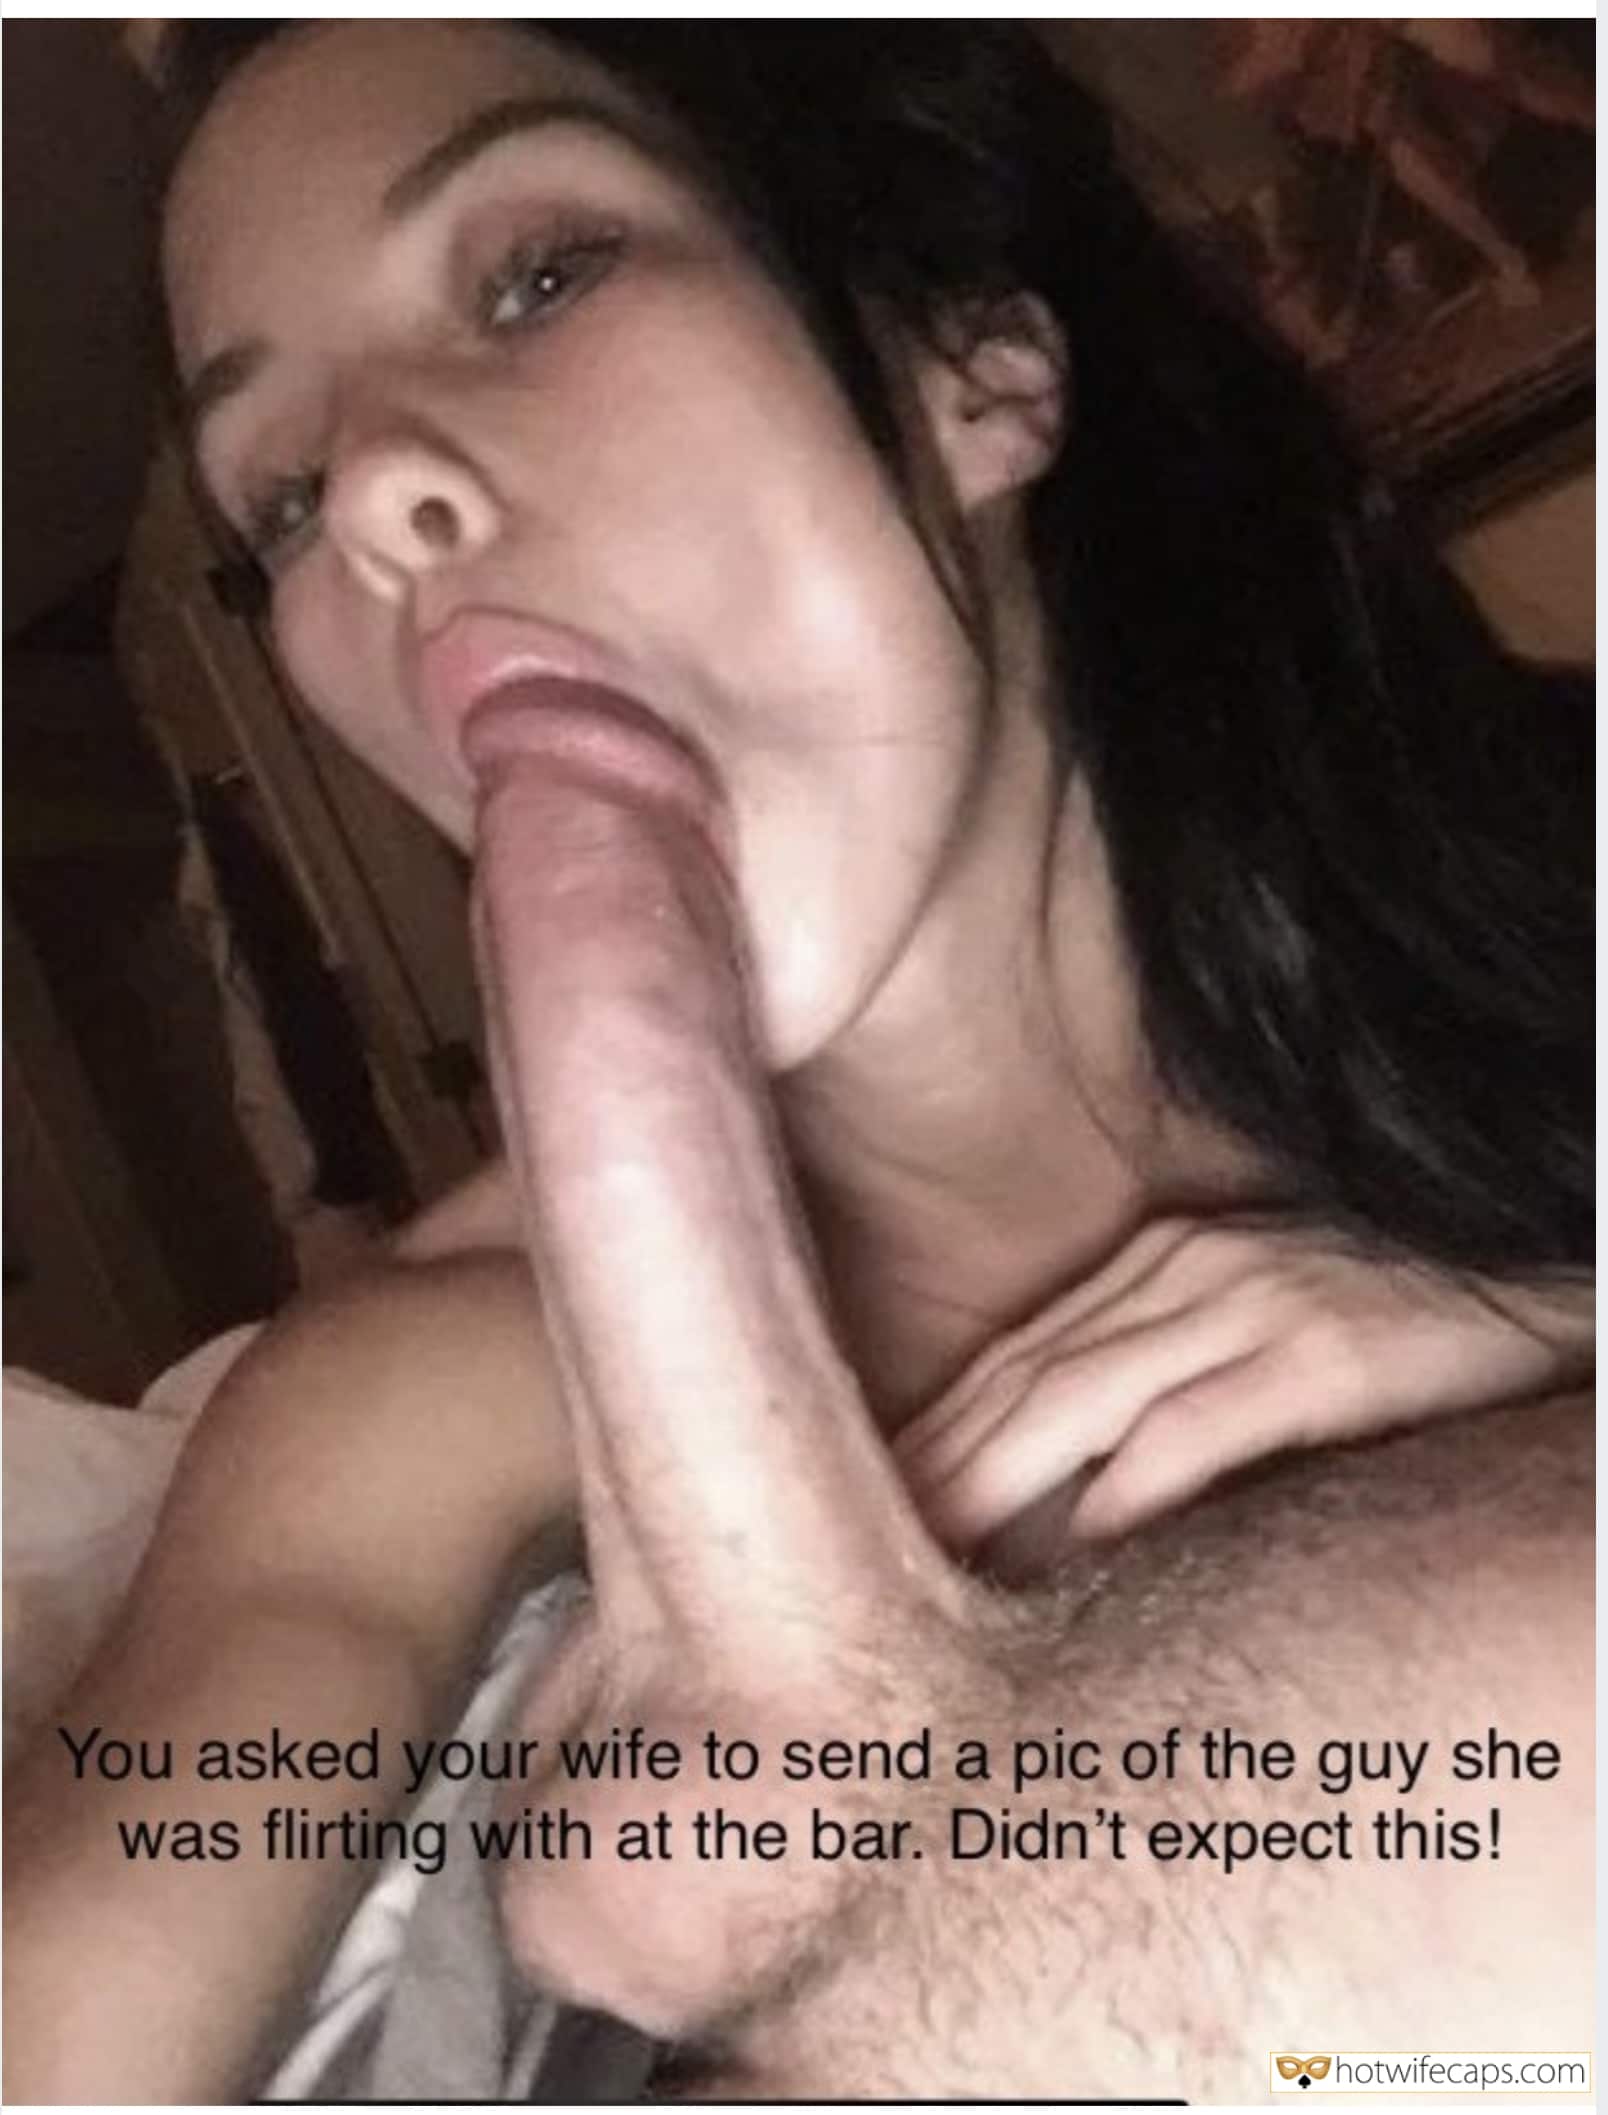 Cheating Blowjob Bigger Cock hotwife caption: You asked your wife to send a pic of the guy she was flirting with at the bar. Didn’t expect this! Sucking His Big Pulsating Dick Head